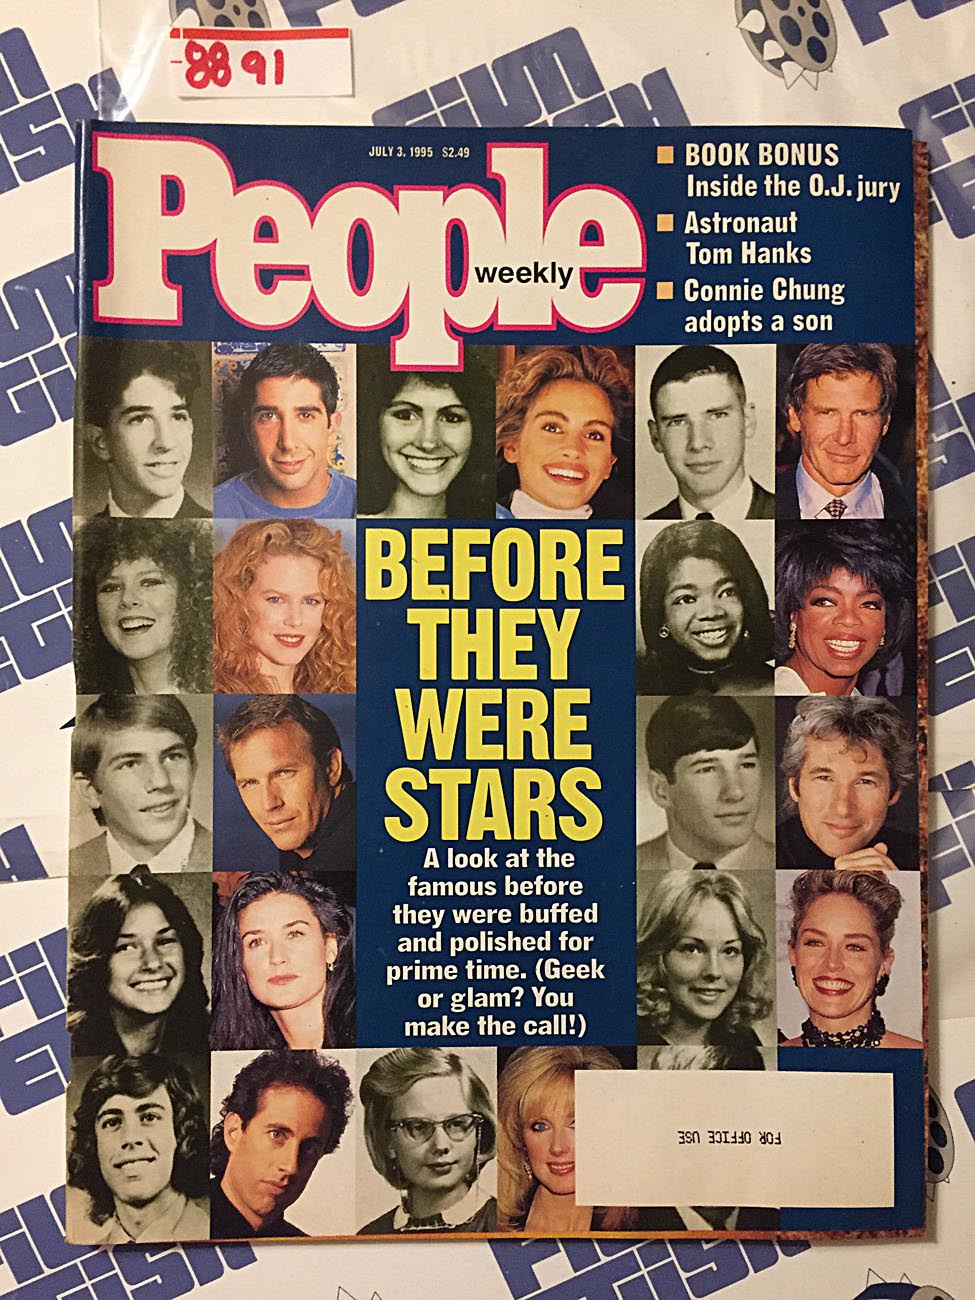 People Weekly Magazine (July 3, 1995) Before They Were Stars Pictures [8891]